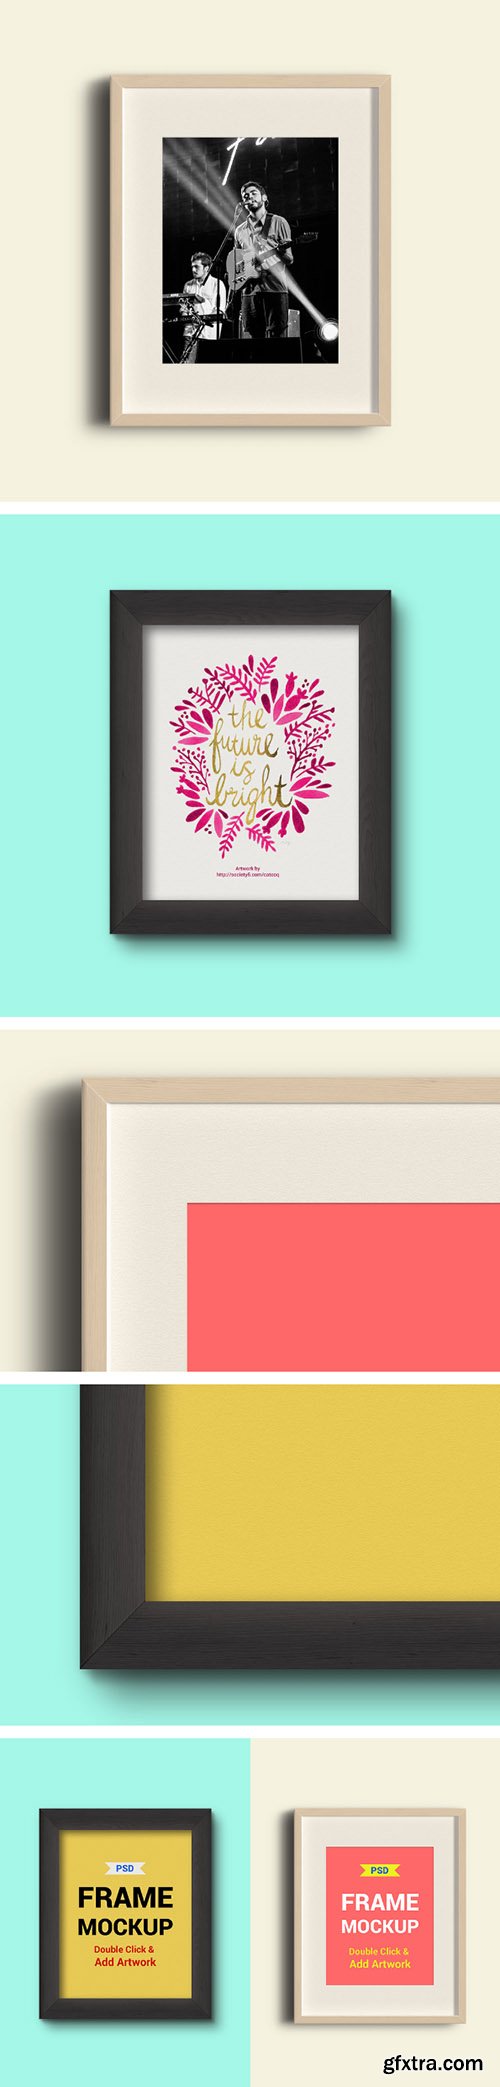 PSD Mock-Up\'s - Two Photo Frames